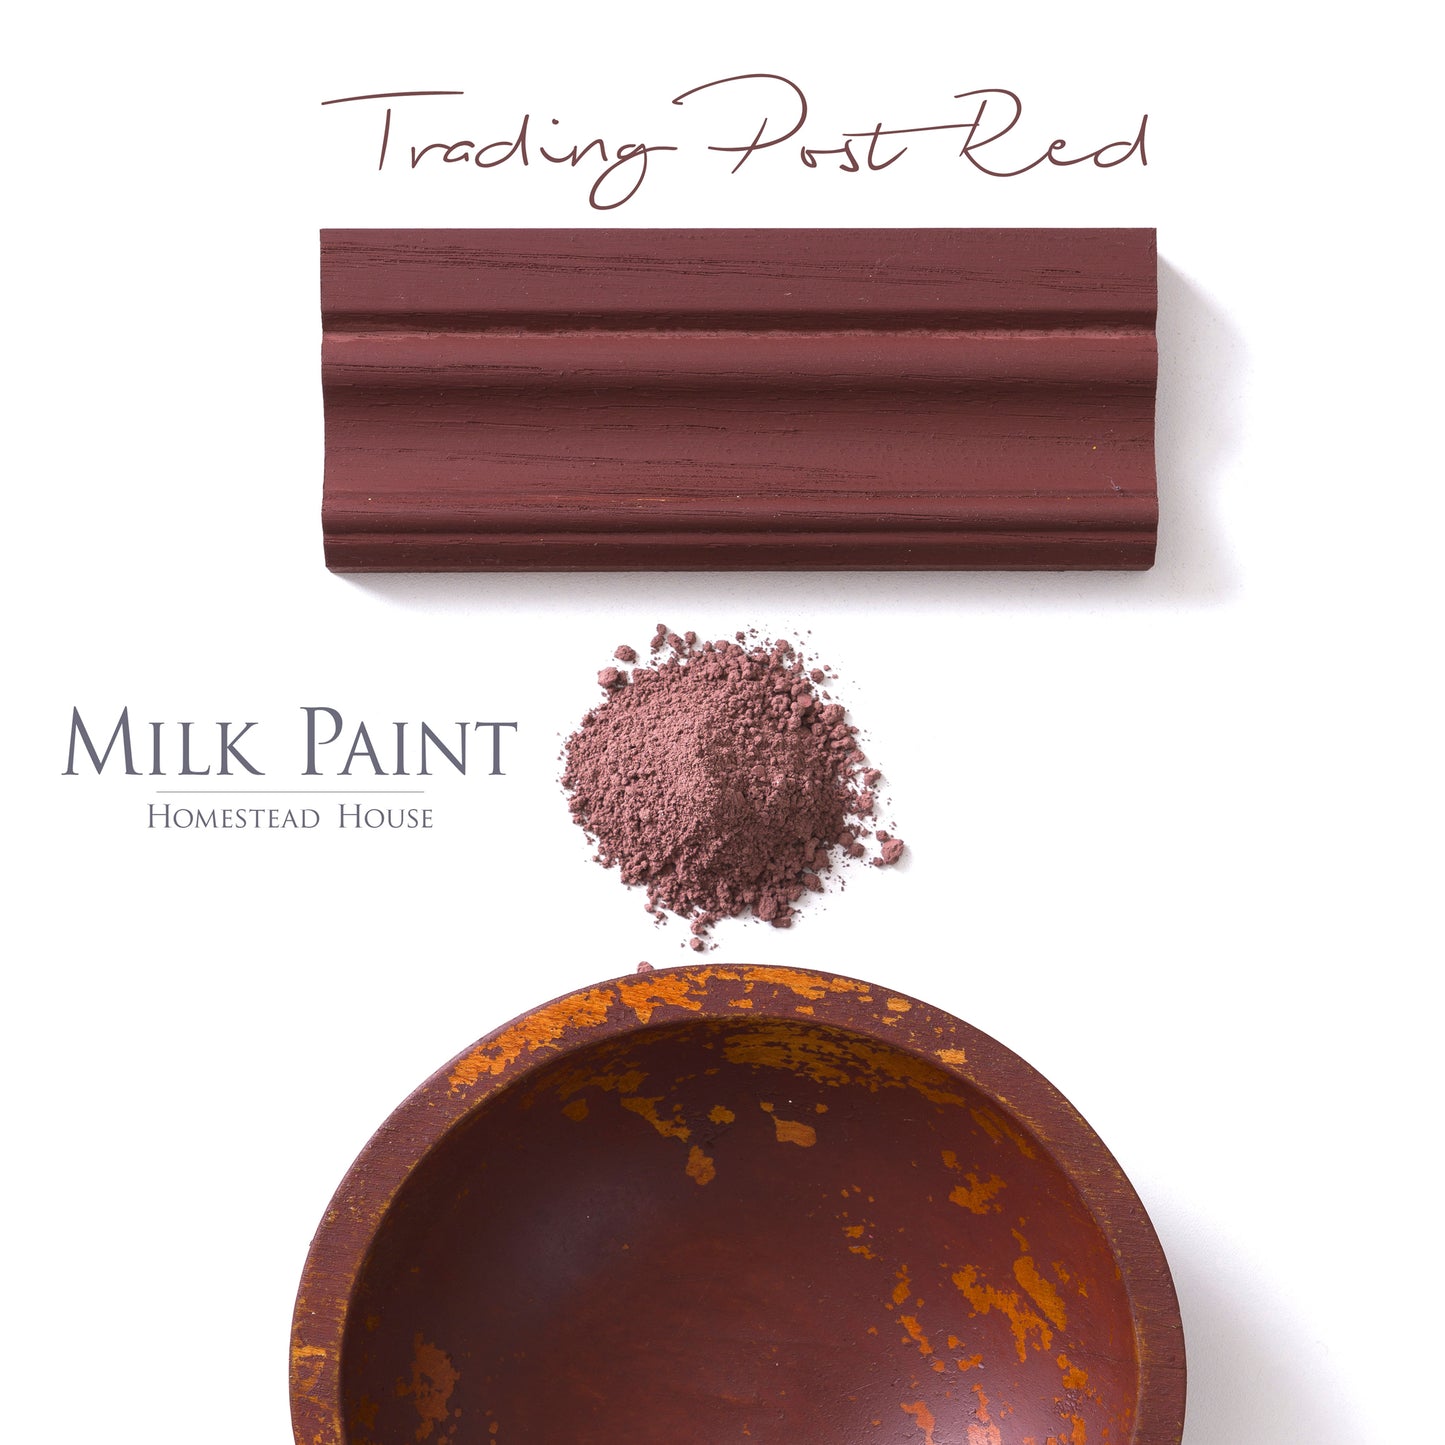 Milk Paint from Homestead House in Trading Post Red, A deep rich red with a brown undertone.  |  homesteadhouse.ca